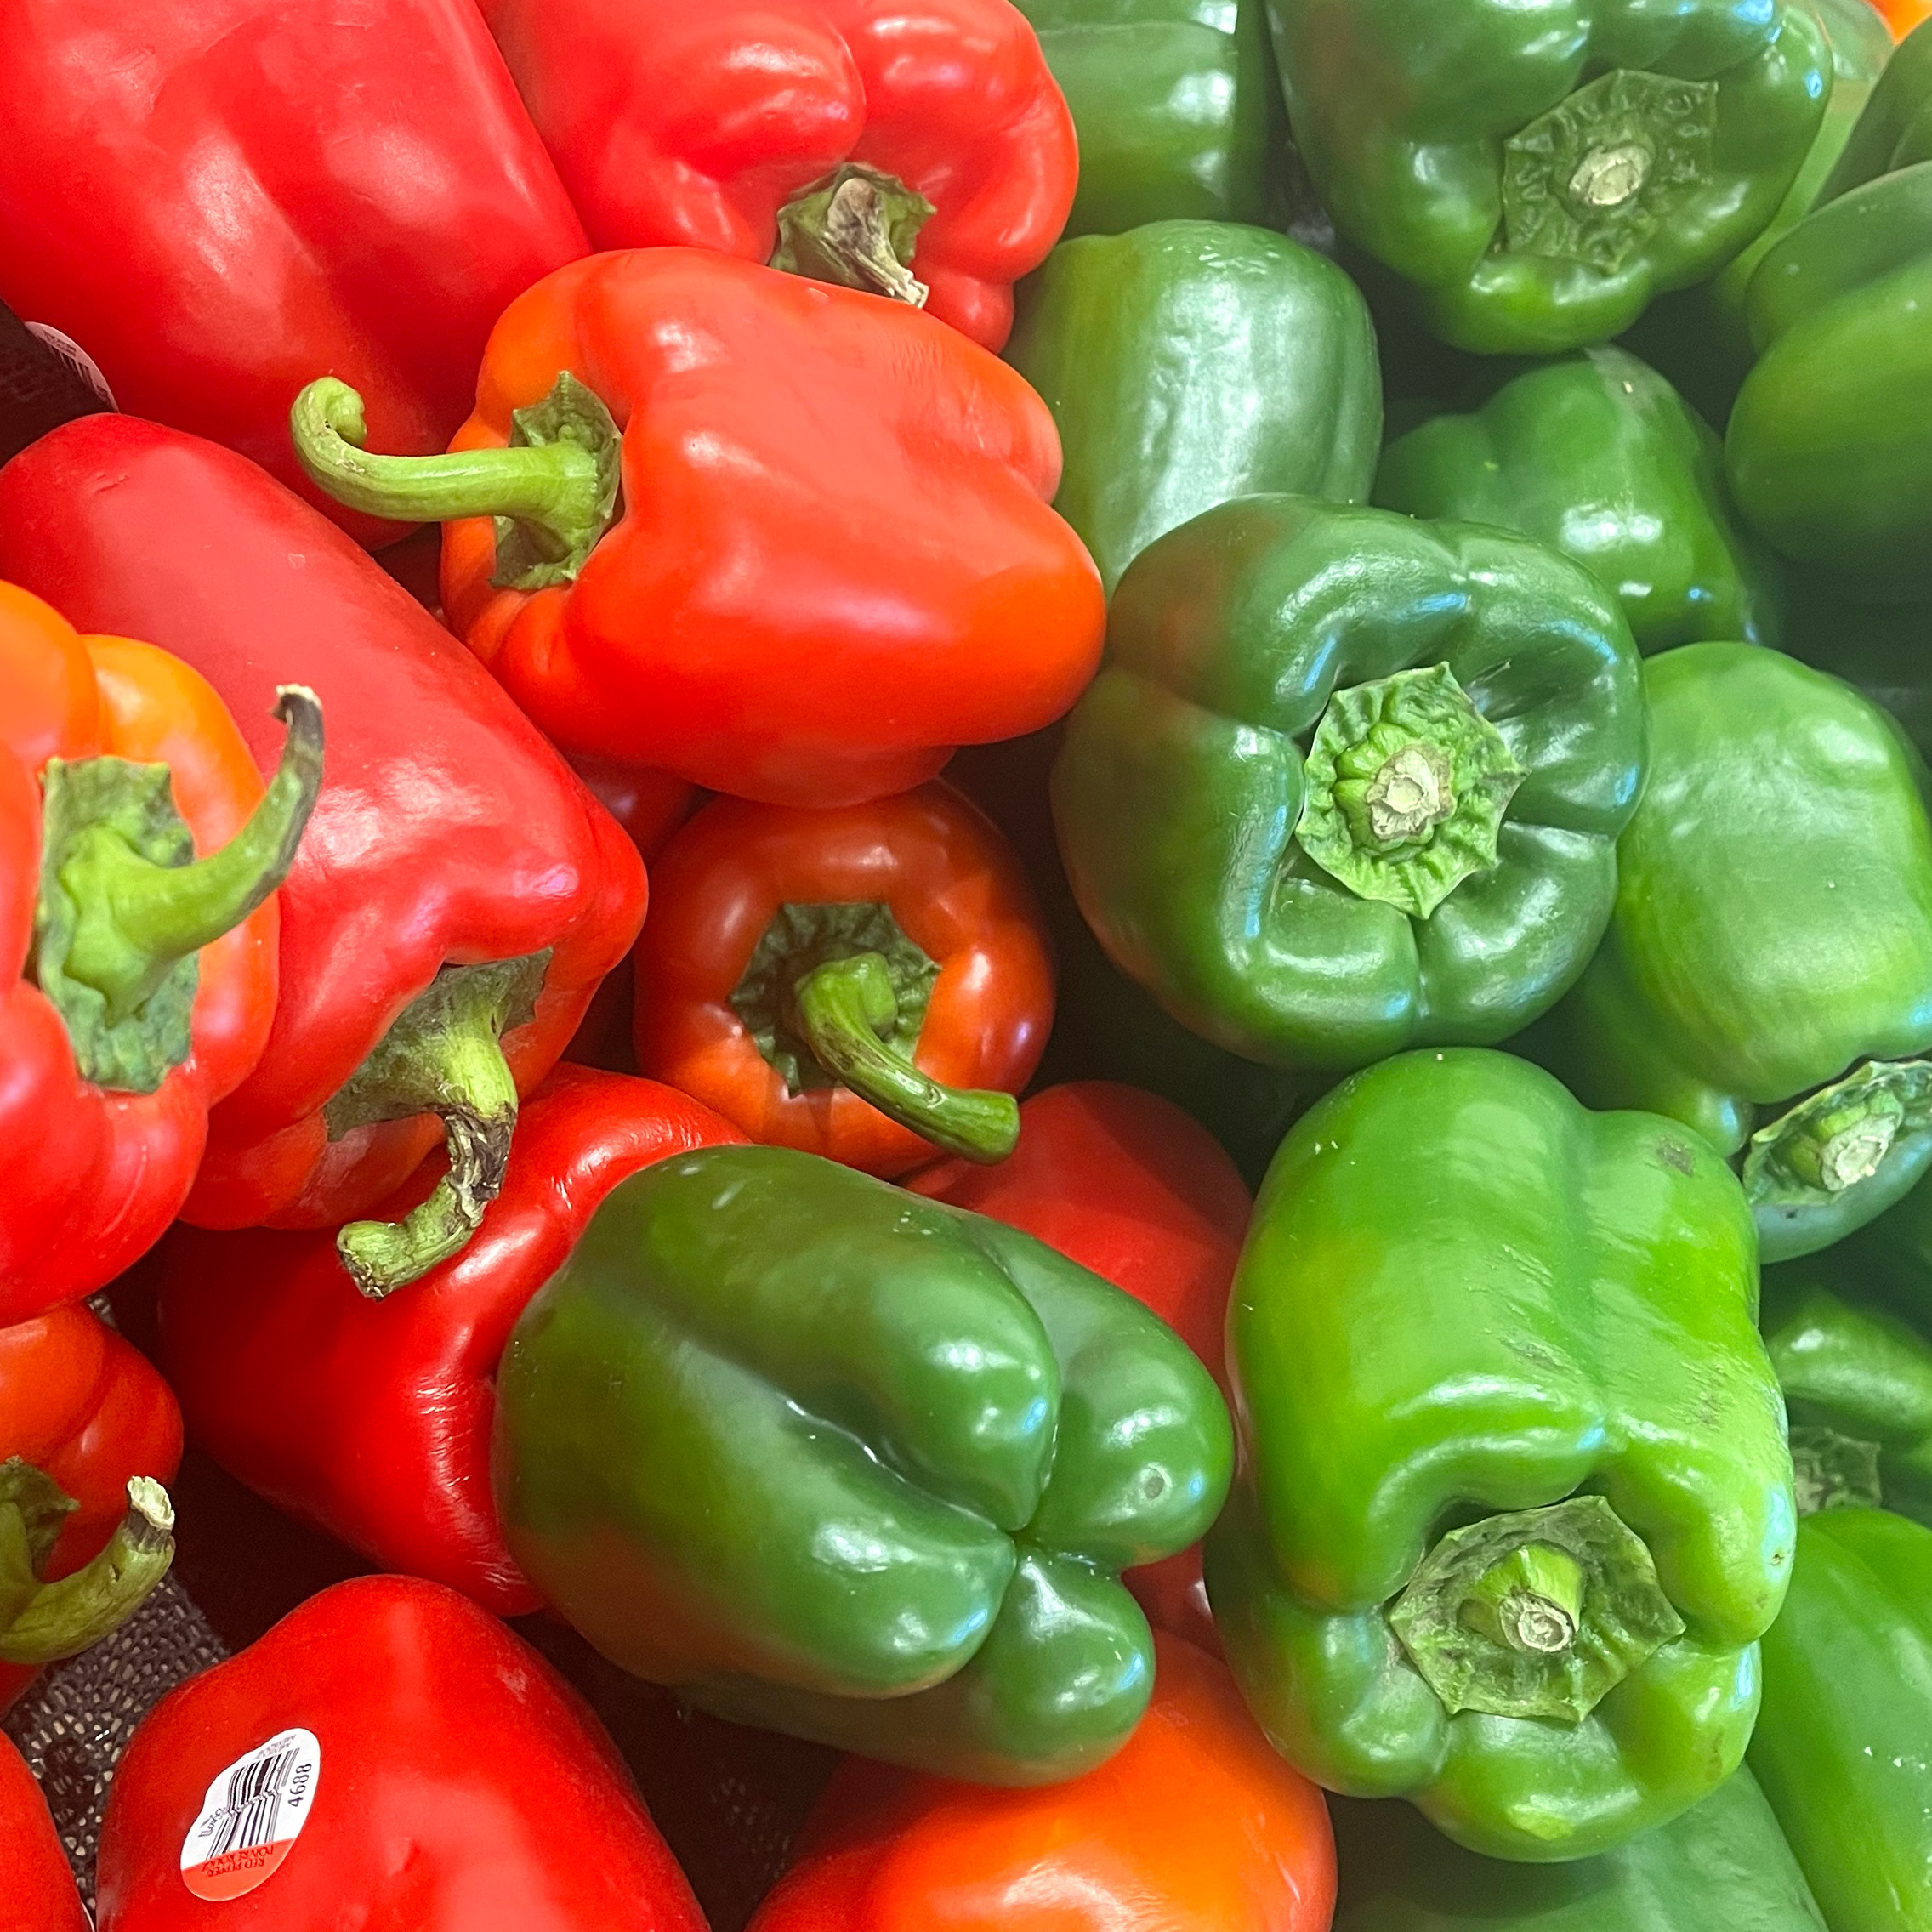 Green and red peppers on display.